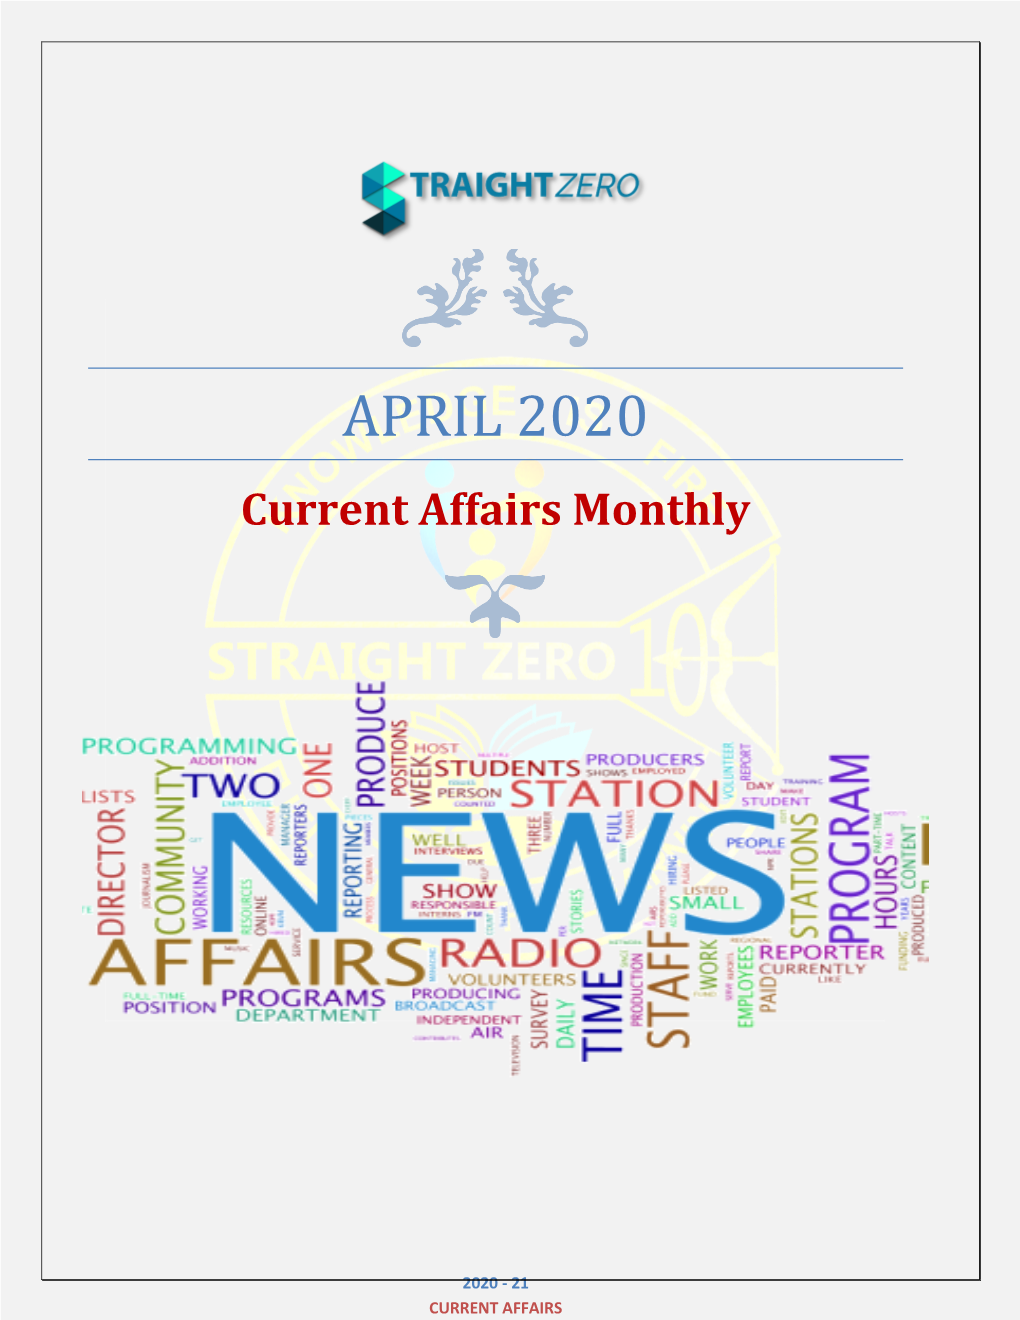 APRIL 2020 Current Affairs Monthly